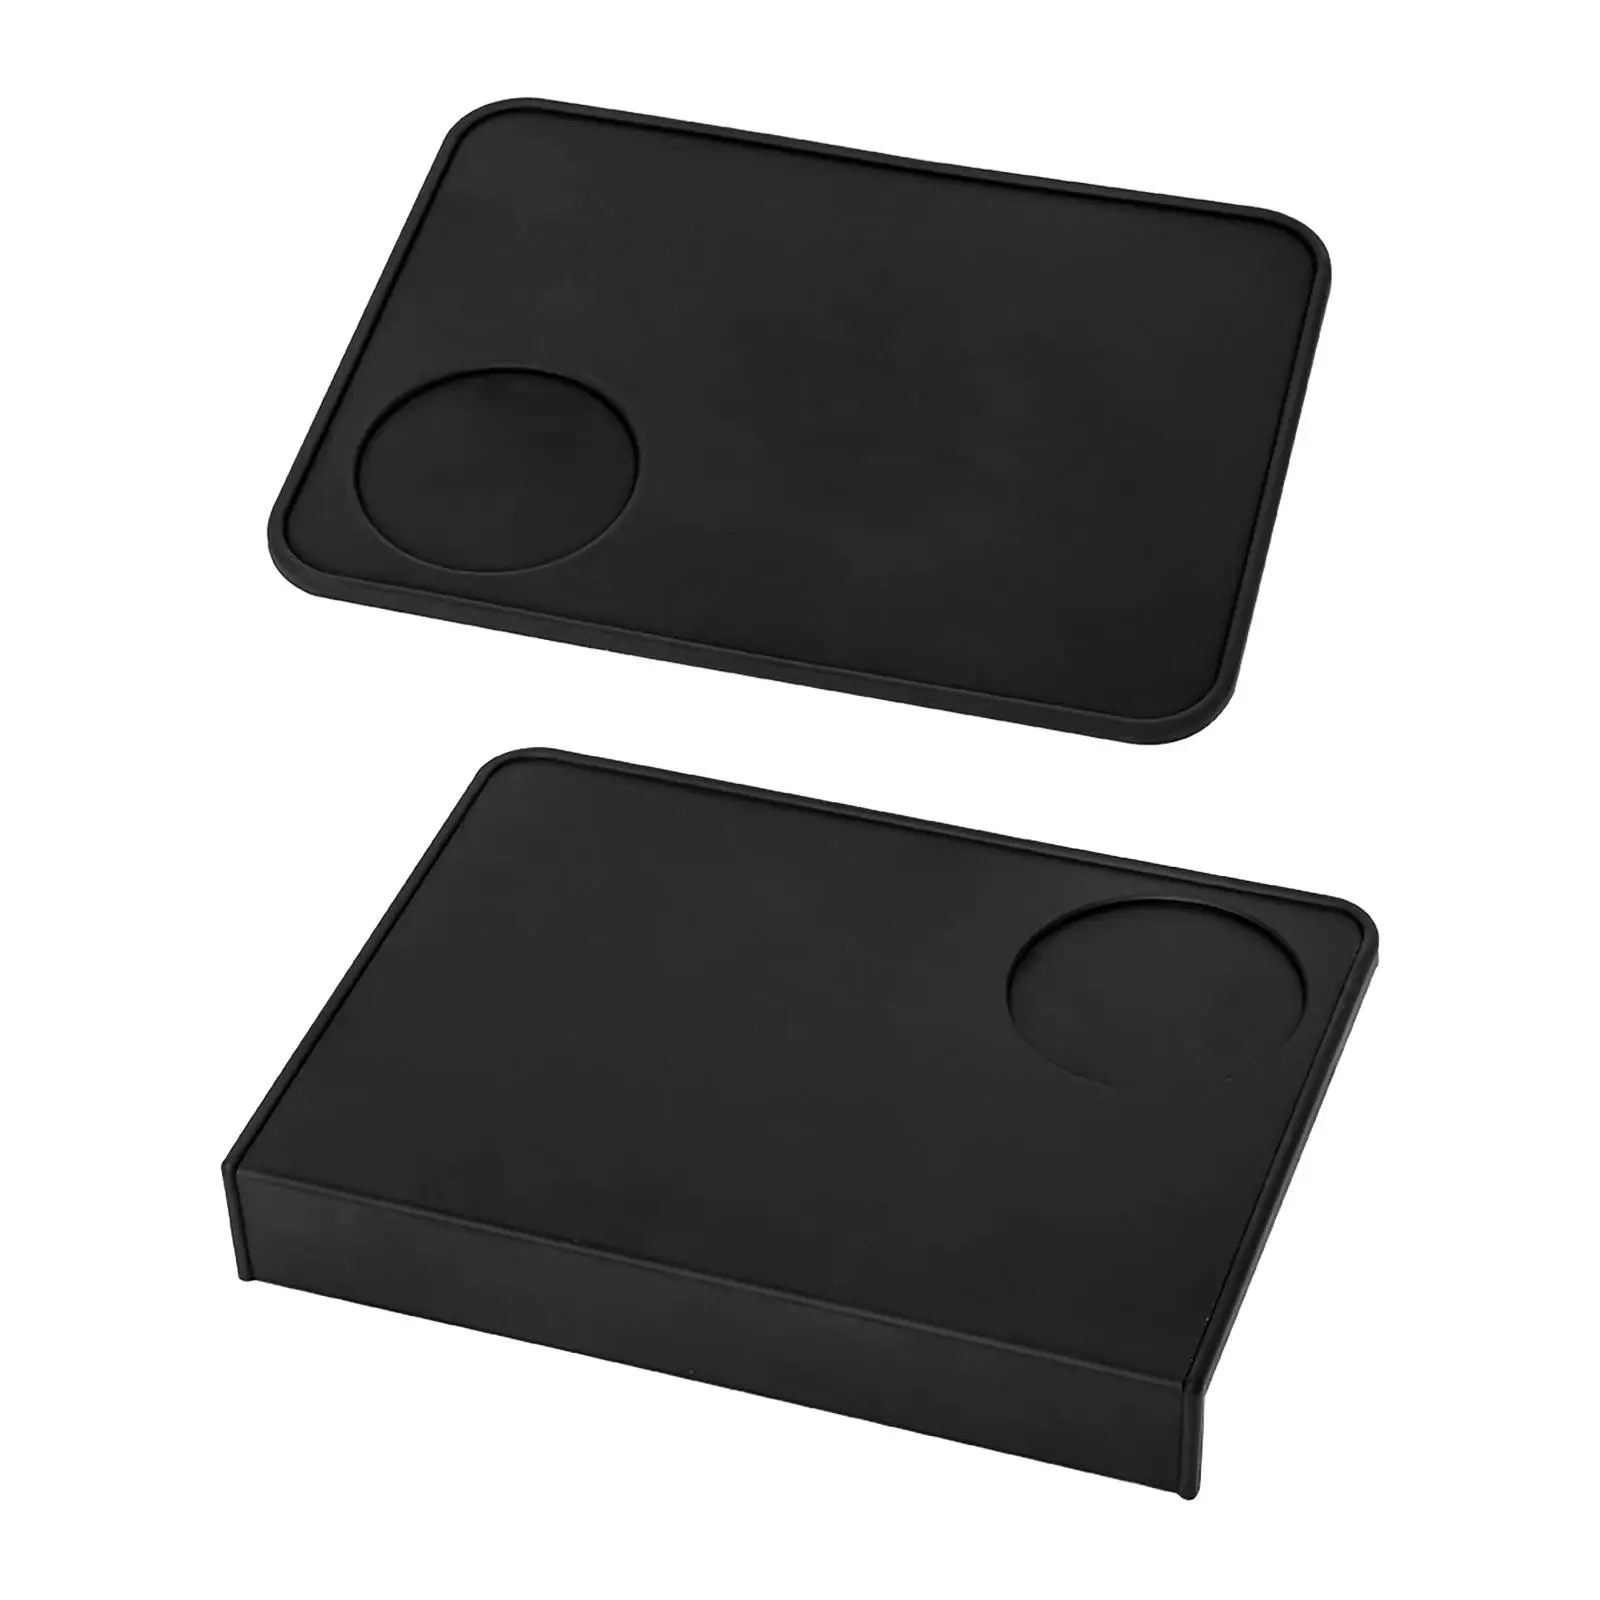 Coffee Tamper Mat Nonslip Wear Resistant Heat Resistant Coffee Utensils Soft Professional for Kitchen Coffee Bar Countertop Home